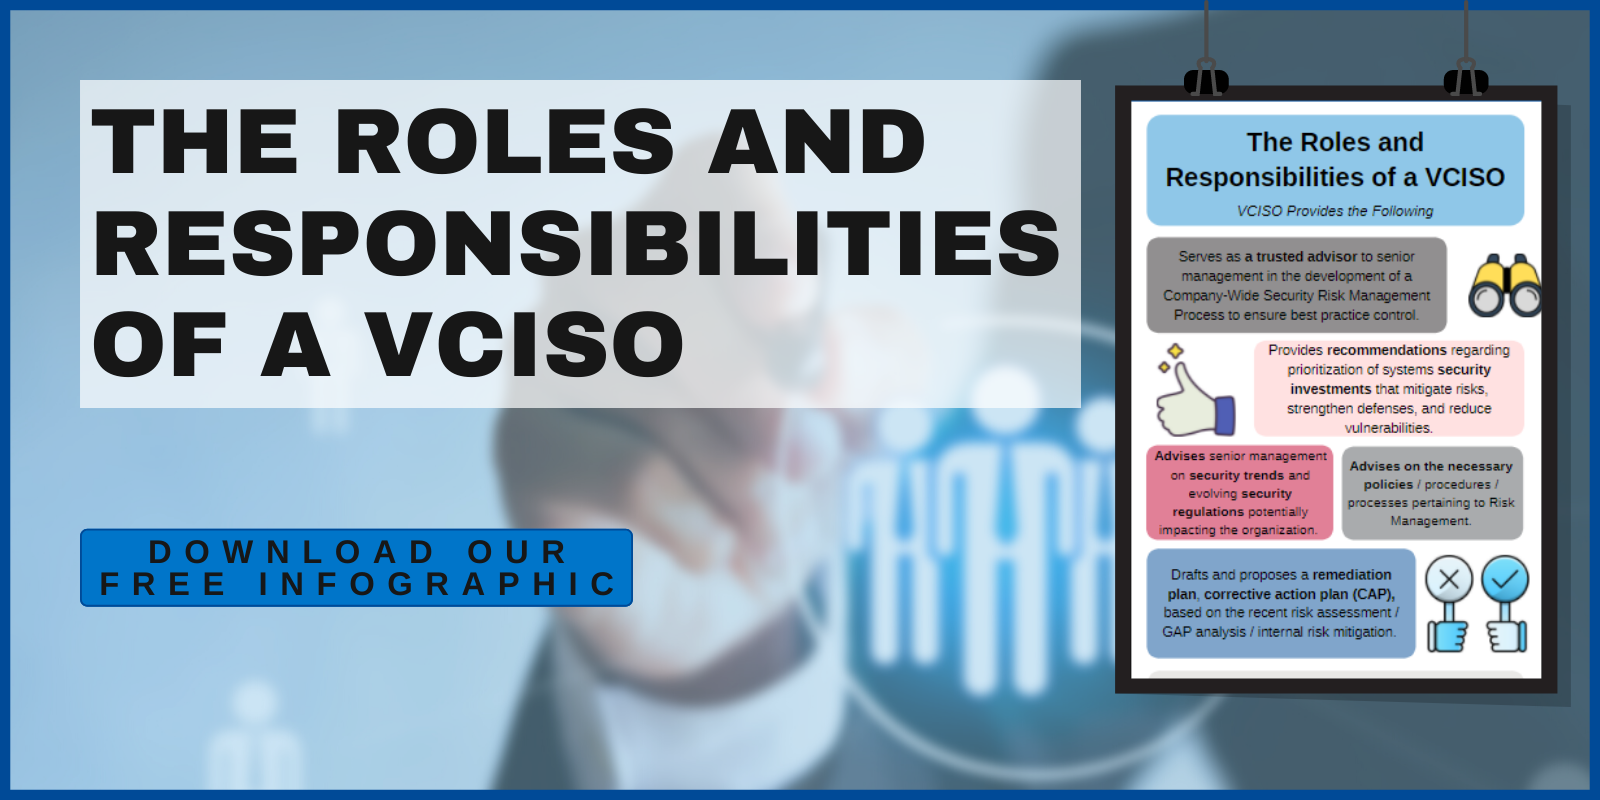 Roles and Responsibilities Marketing Graphic-1